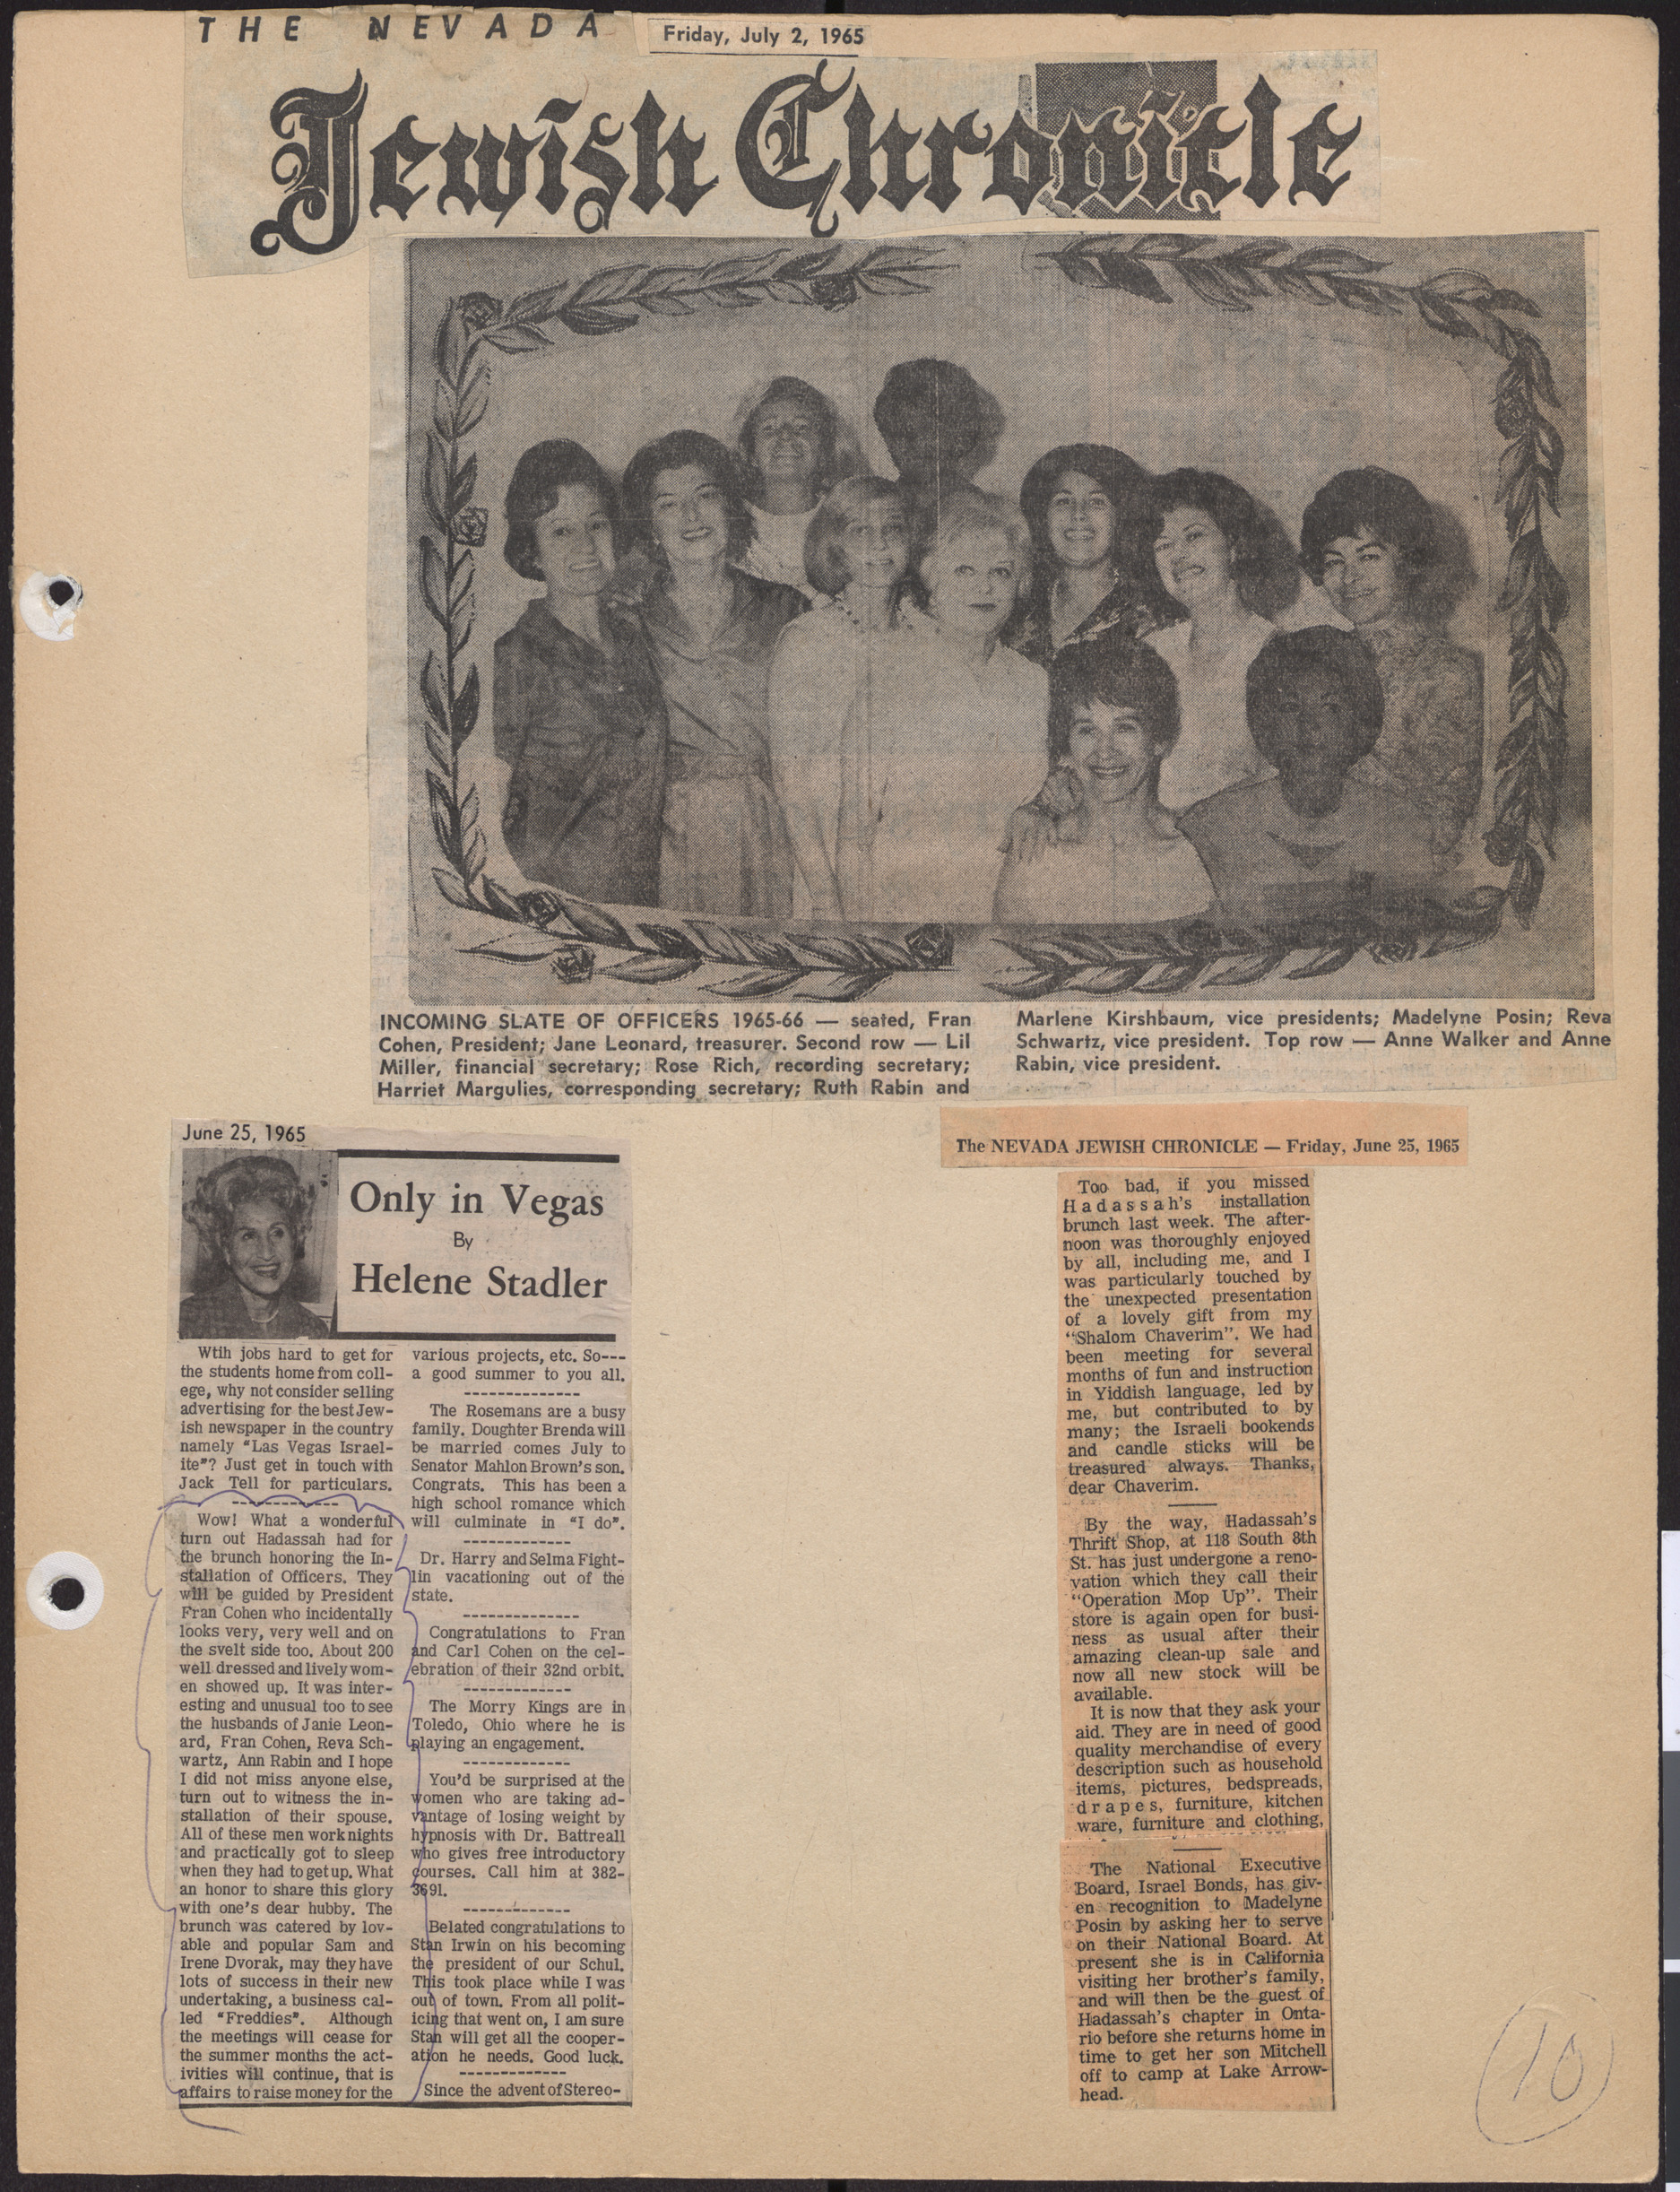 Newspaper clippings about Hadassah officer installation, 1965